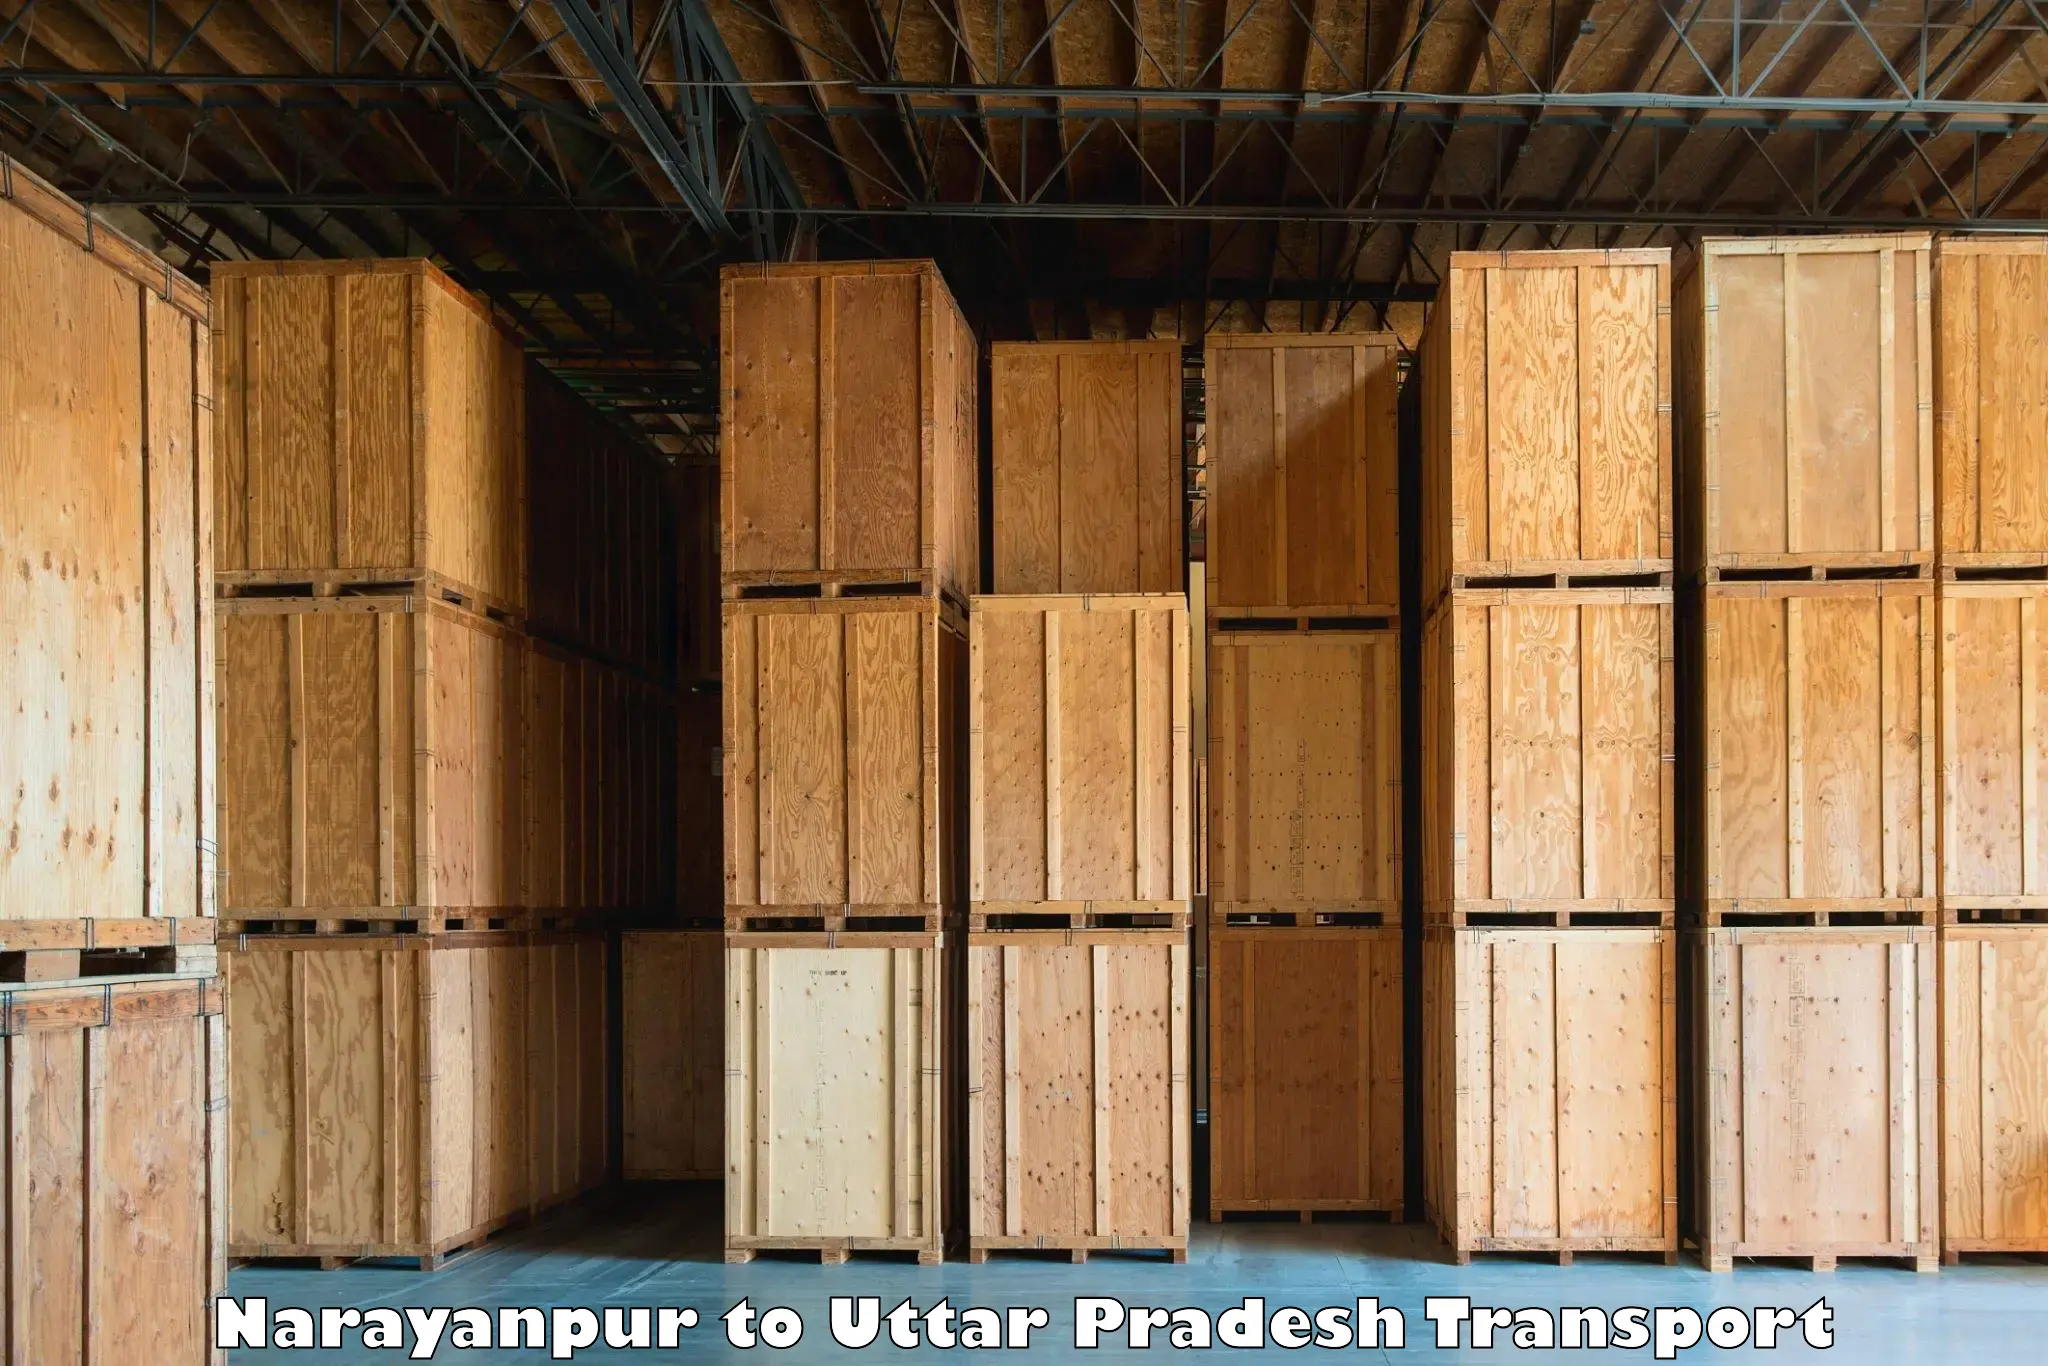 Container transport service Narayanpur to Jalesar